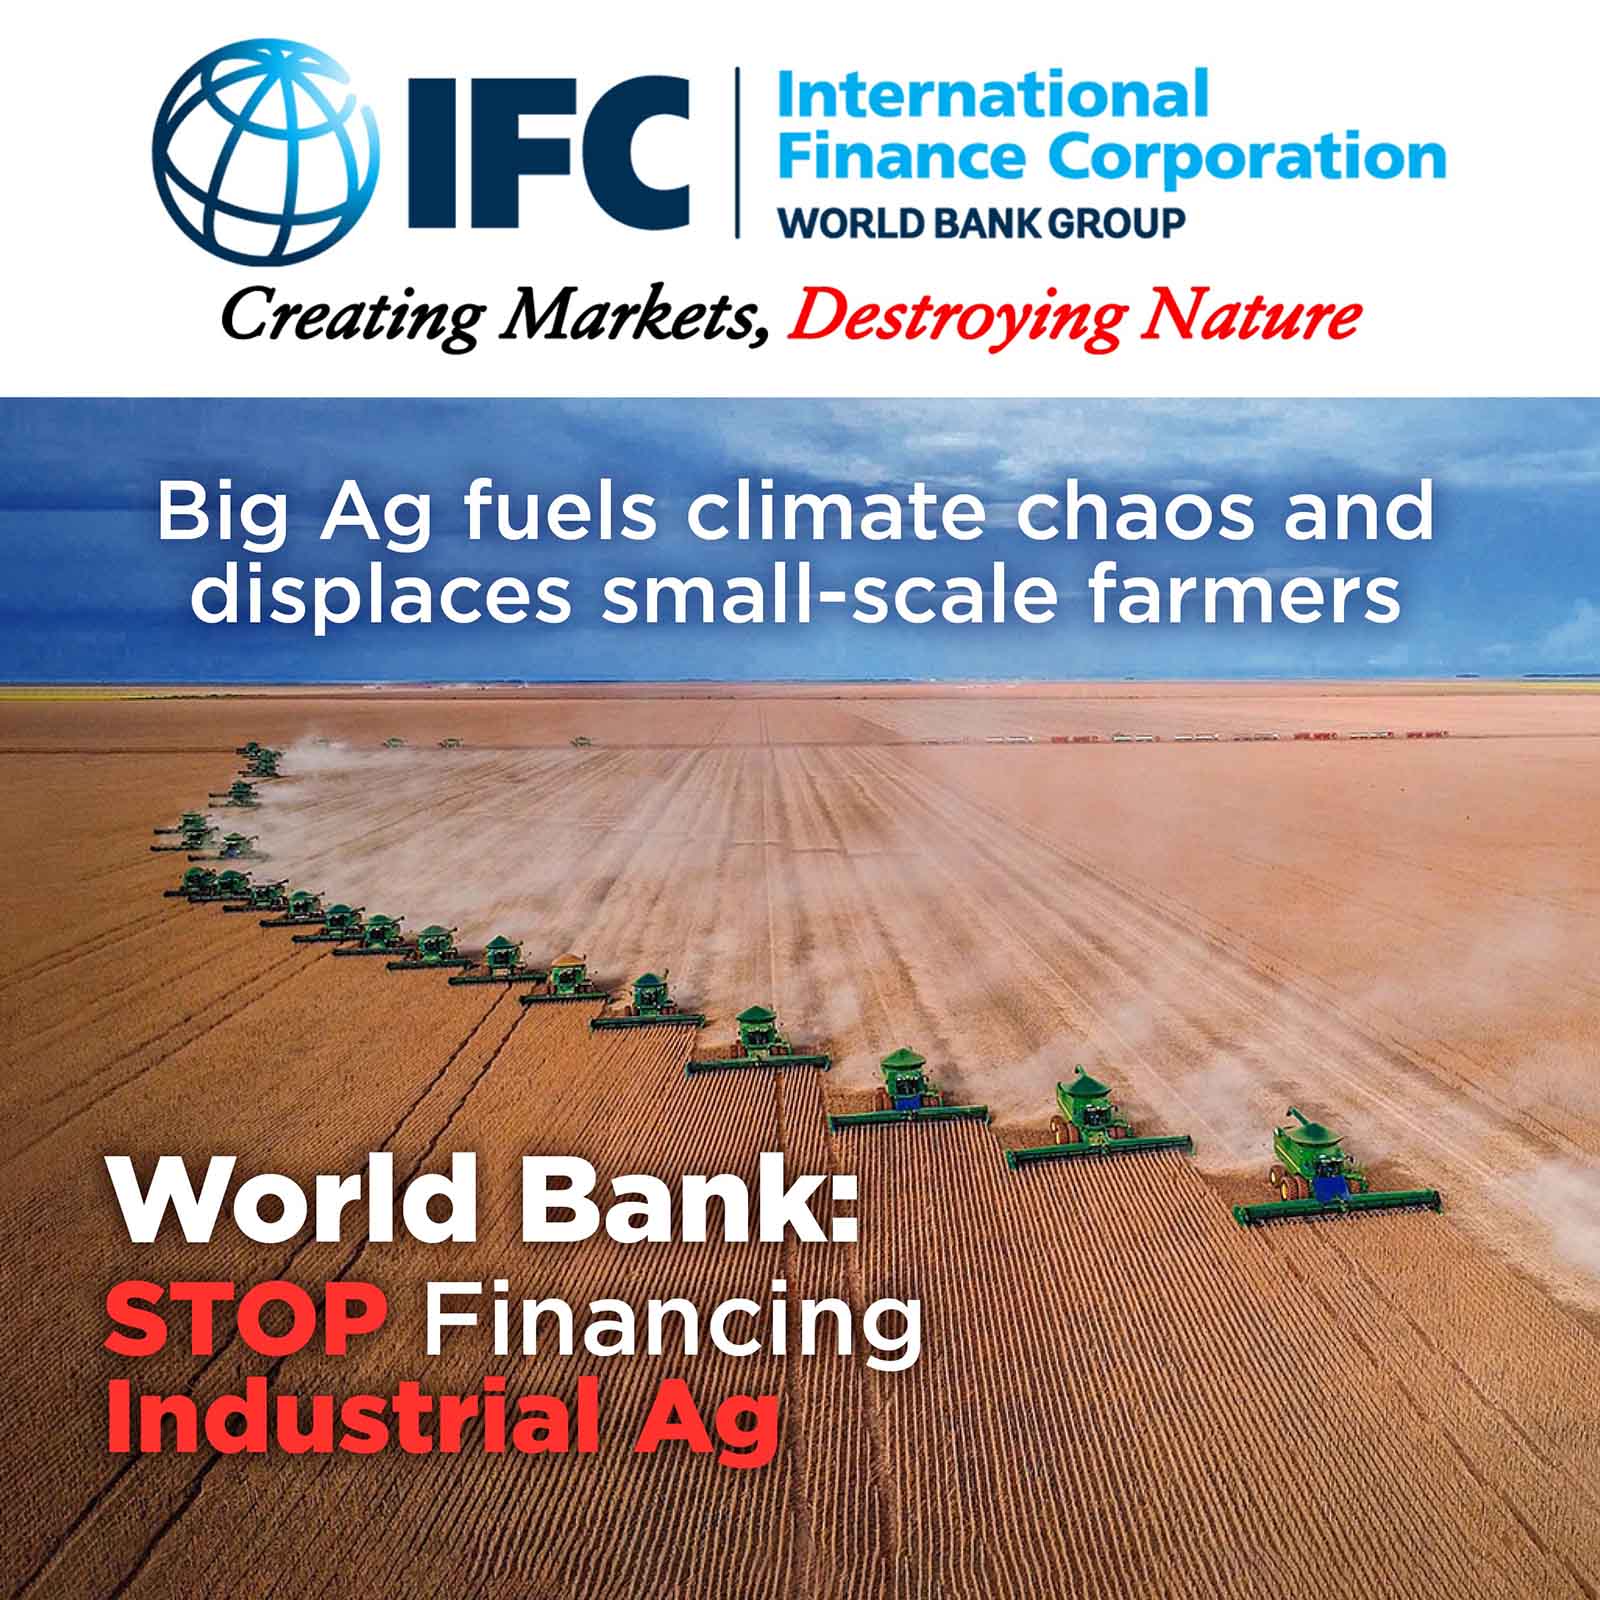 World Bank: STOP Financing Industrial Ag, graphic with an image showing an army of combine harvesters